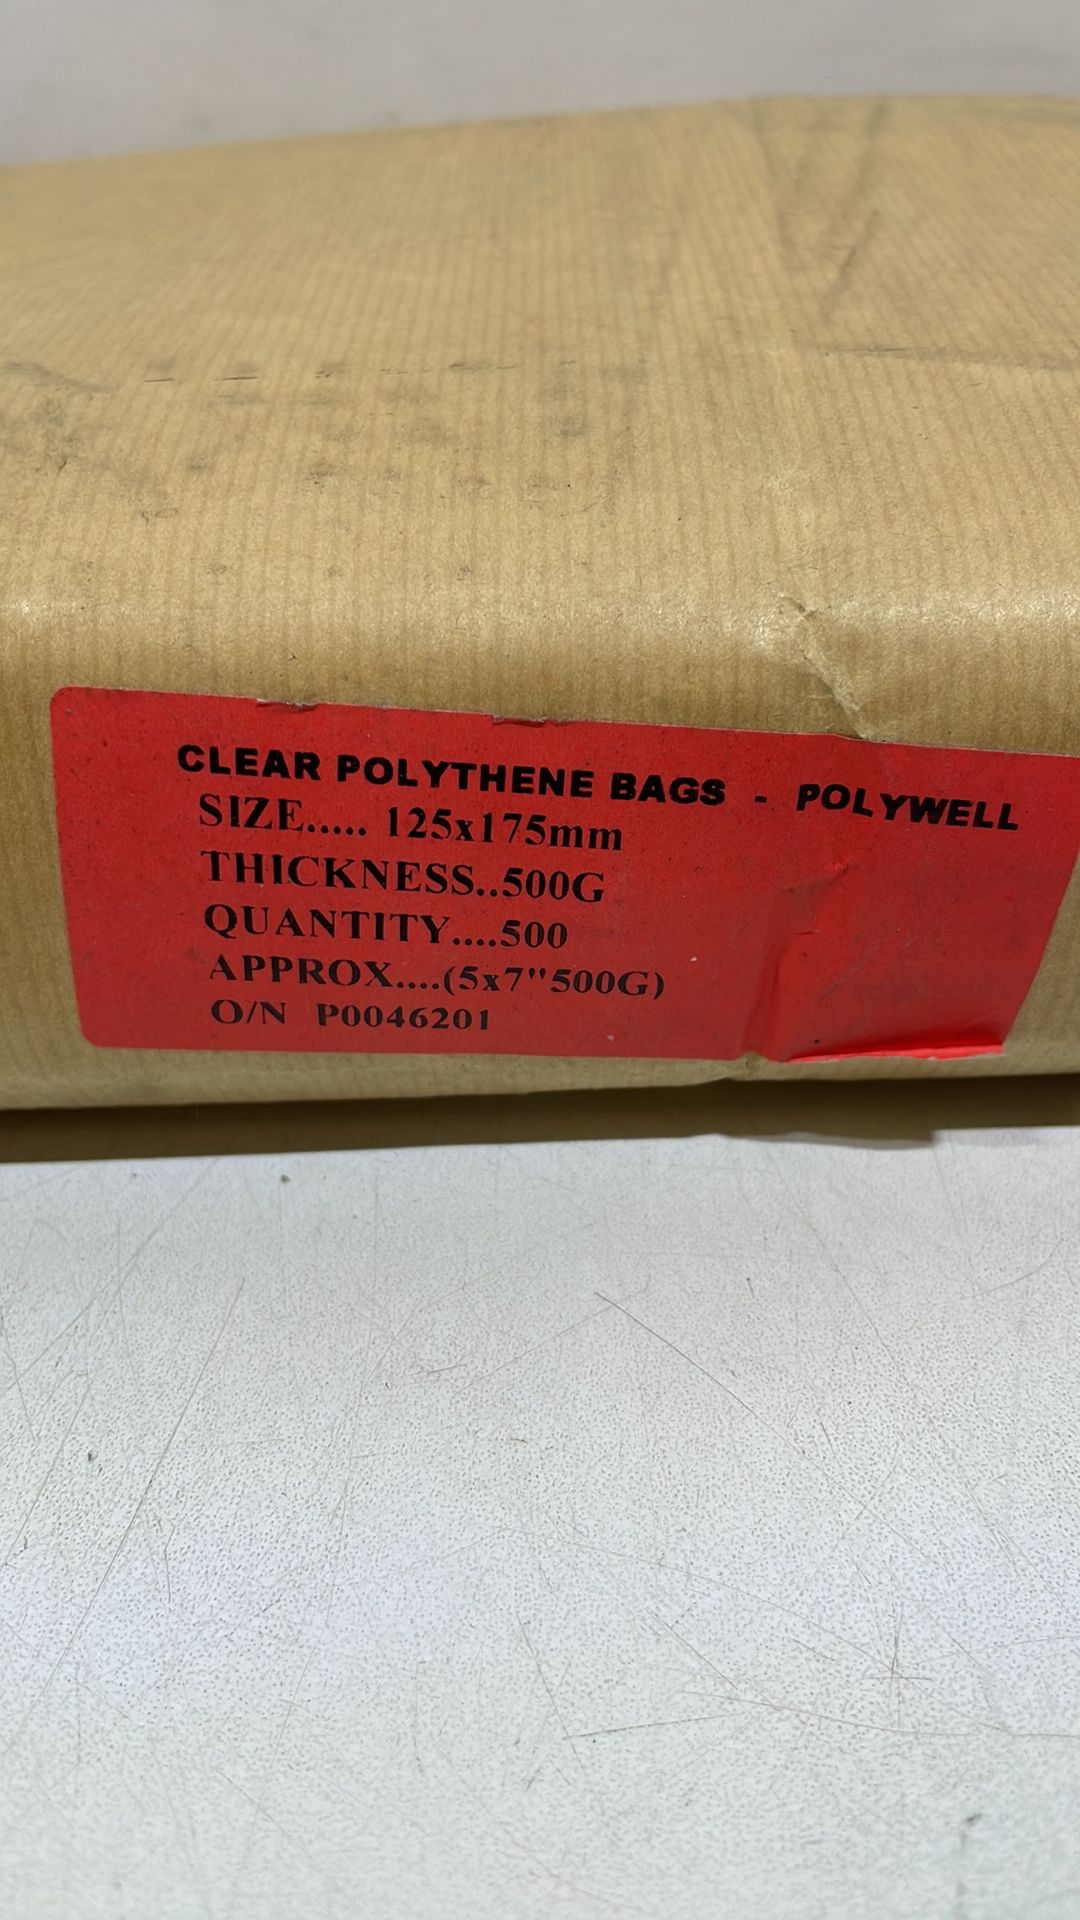 8 x Boxes of 125mm x 175mm Clear Polythene Bags | Qty 500 per Box - Image 2 of 2